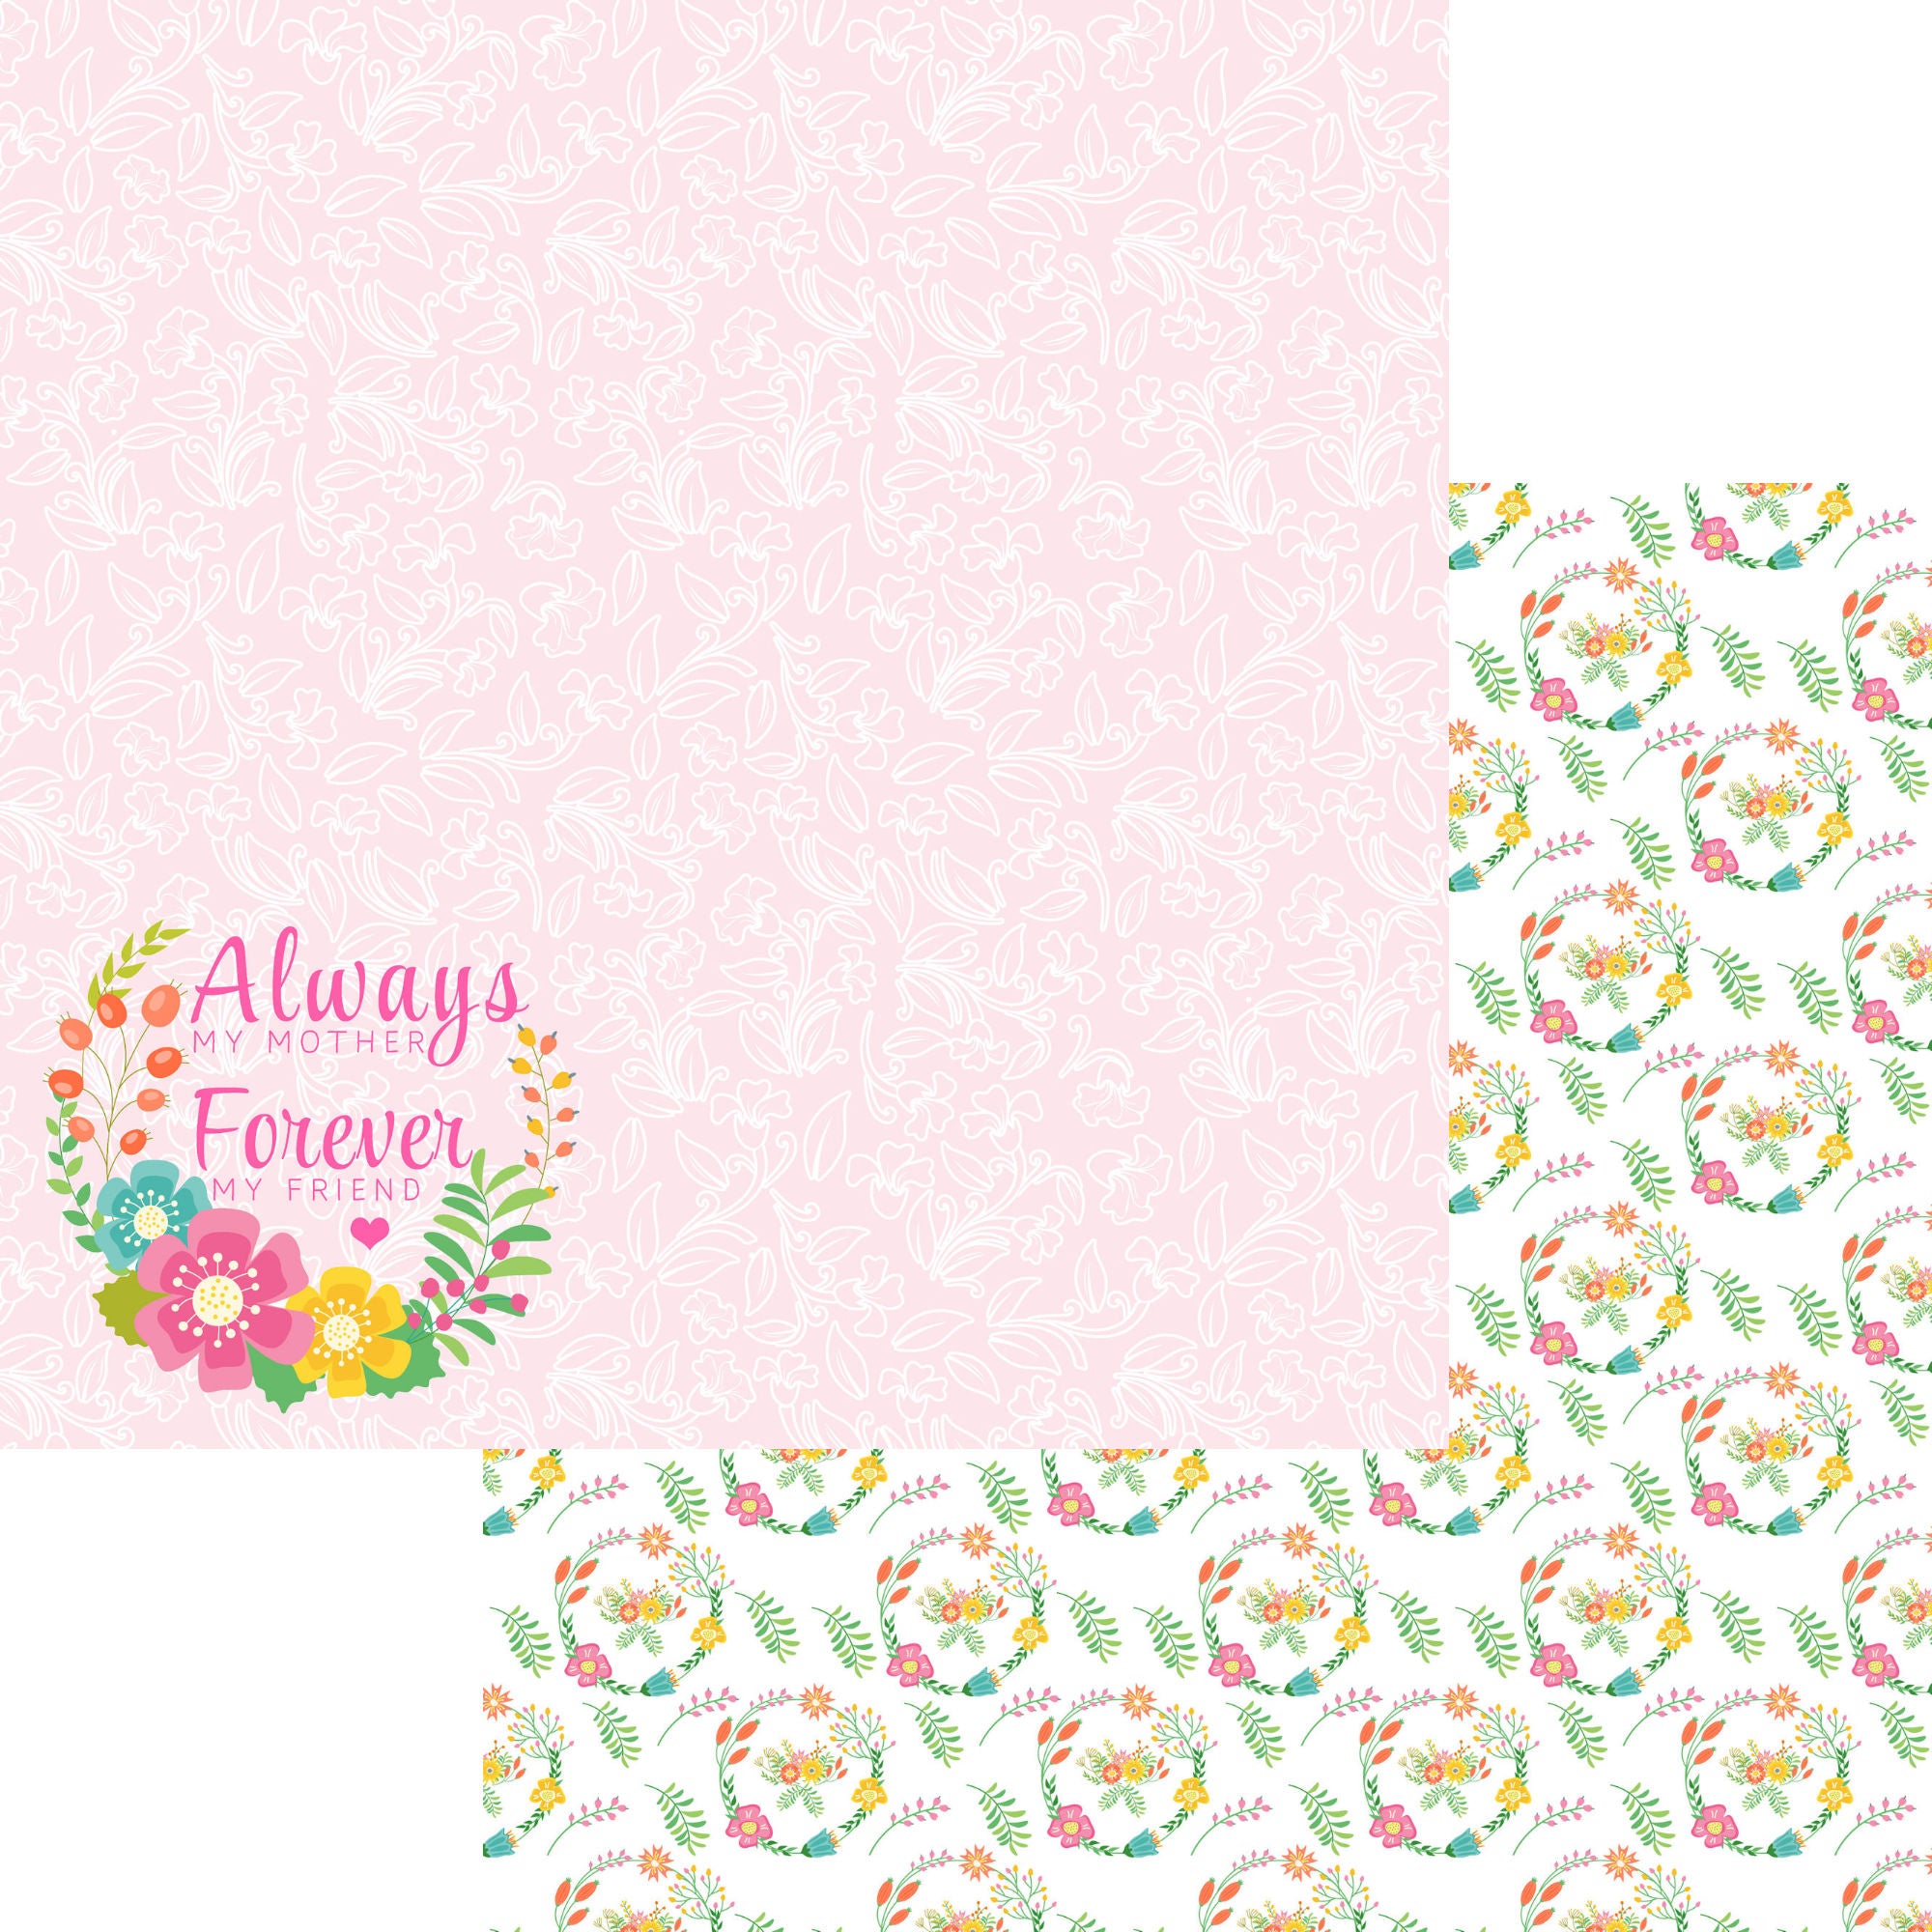 Happy Mother's Day 12 x 12 Scrapbook Paper & Embellishment Kit by SSC Designs